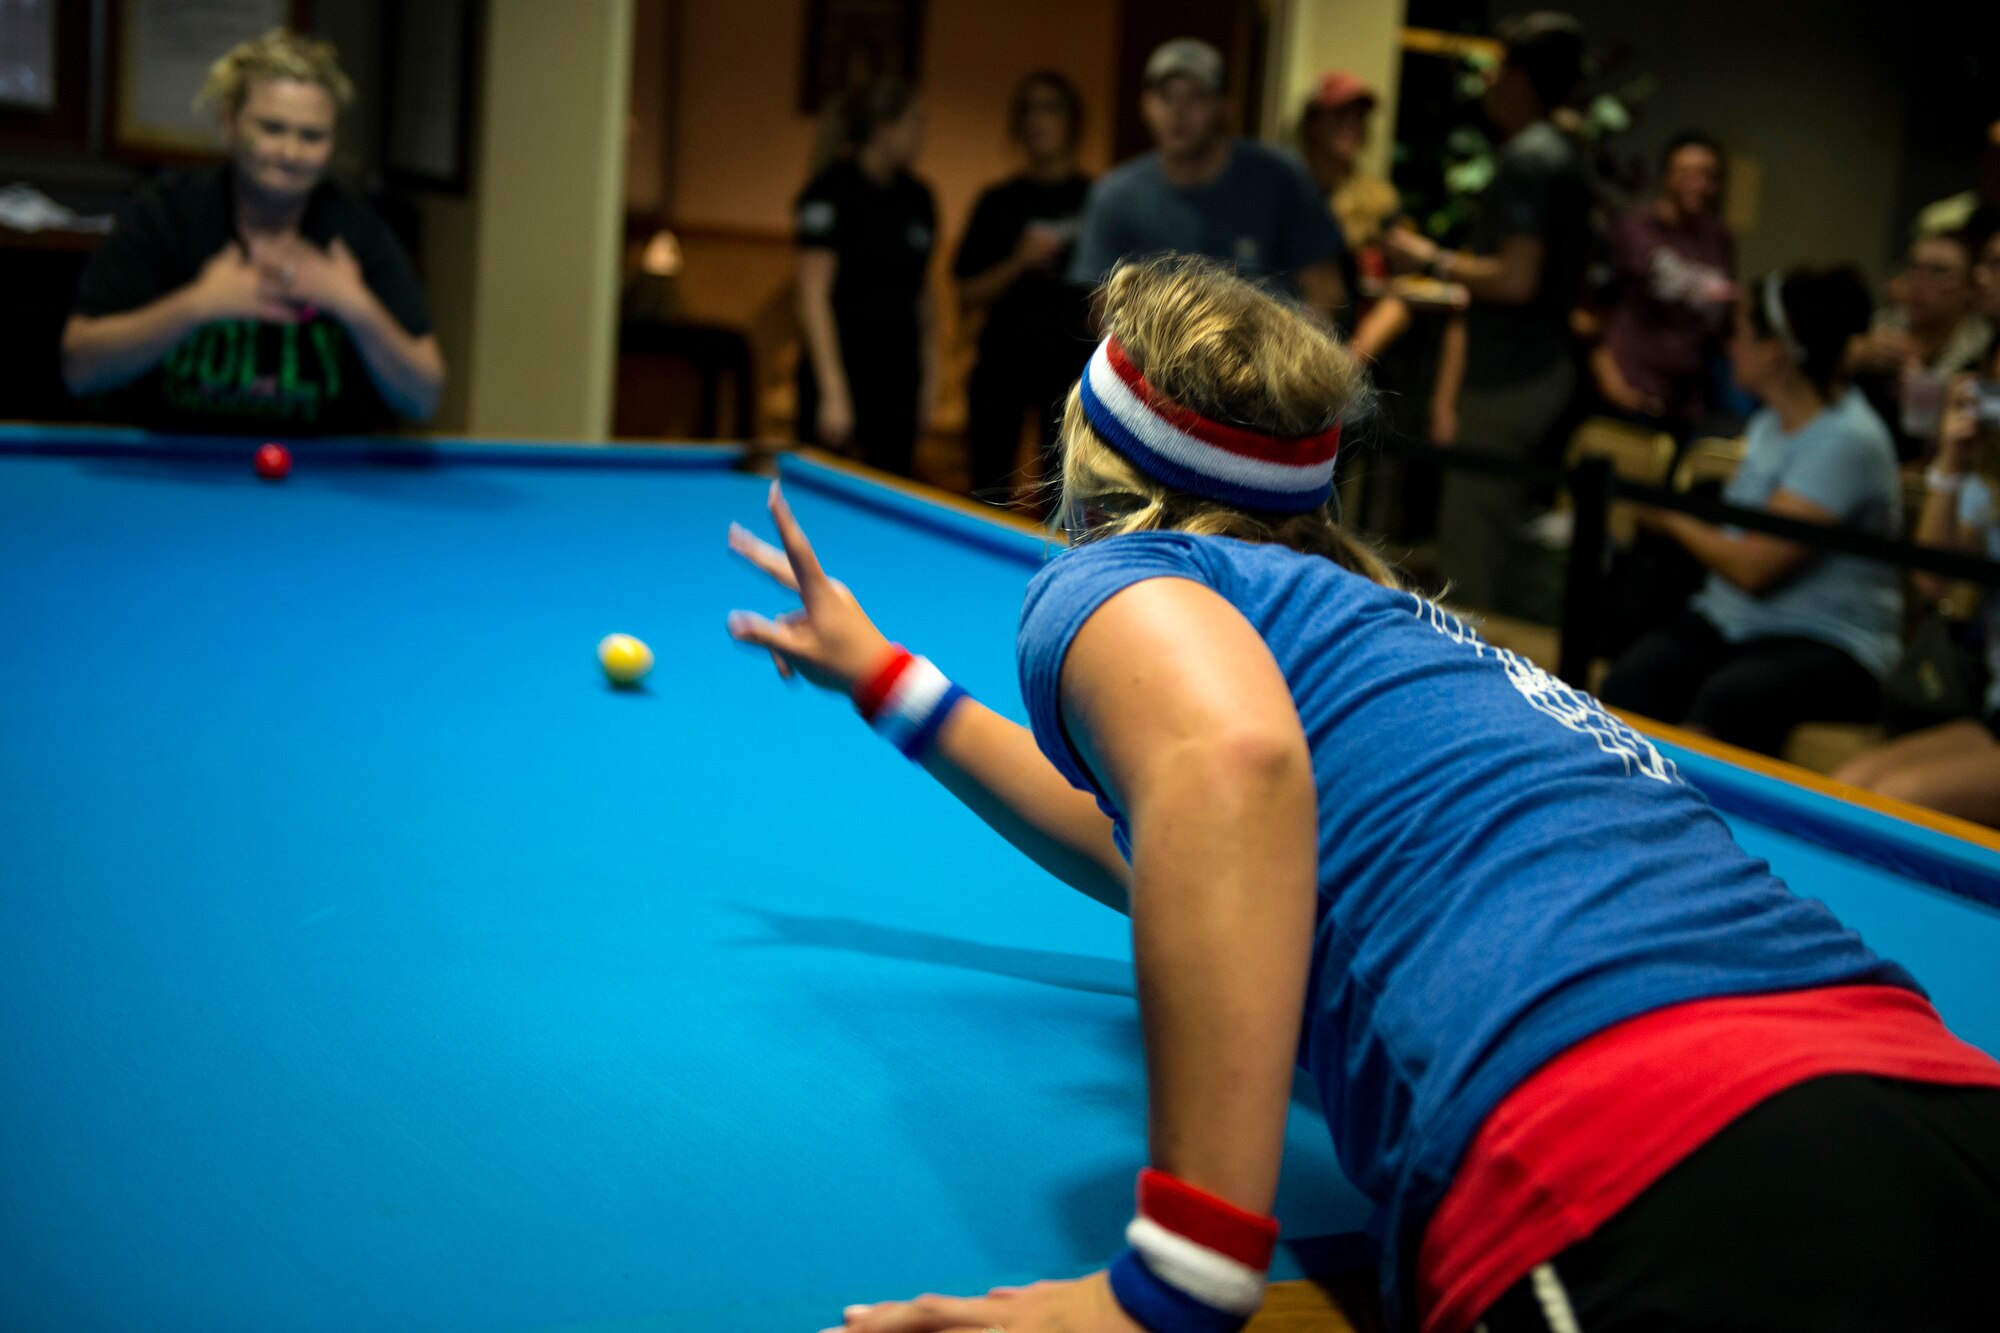 Jessica Seyfried, crud player, rolls a billiard ball at the start of a match during a spouses crud tourney, April 27, 2018, at Moody Air Force Base, Ga. The Moody spouses built the event around teamwork and comradery, giving them an opportunity to experience a long-held tradition amongst the Air Force fighter and rescue squadrons. Though the game originated in the Royal Canadian Air Force, it has since been adopted by the U.S. (U.S. Air Force photo by Airman 1st Class Erick Requadt)